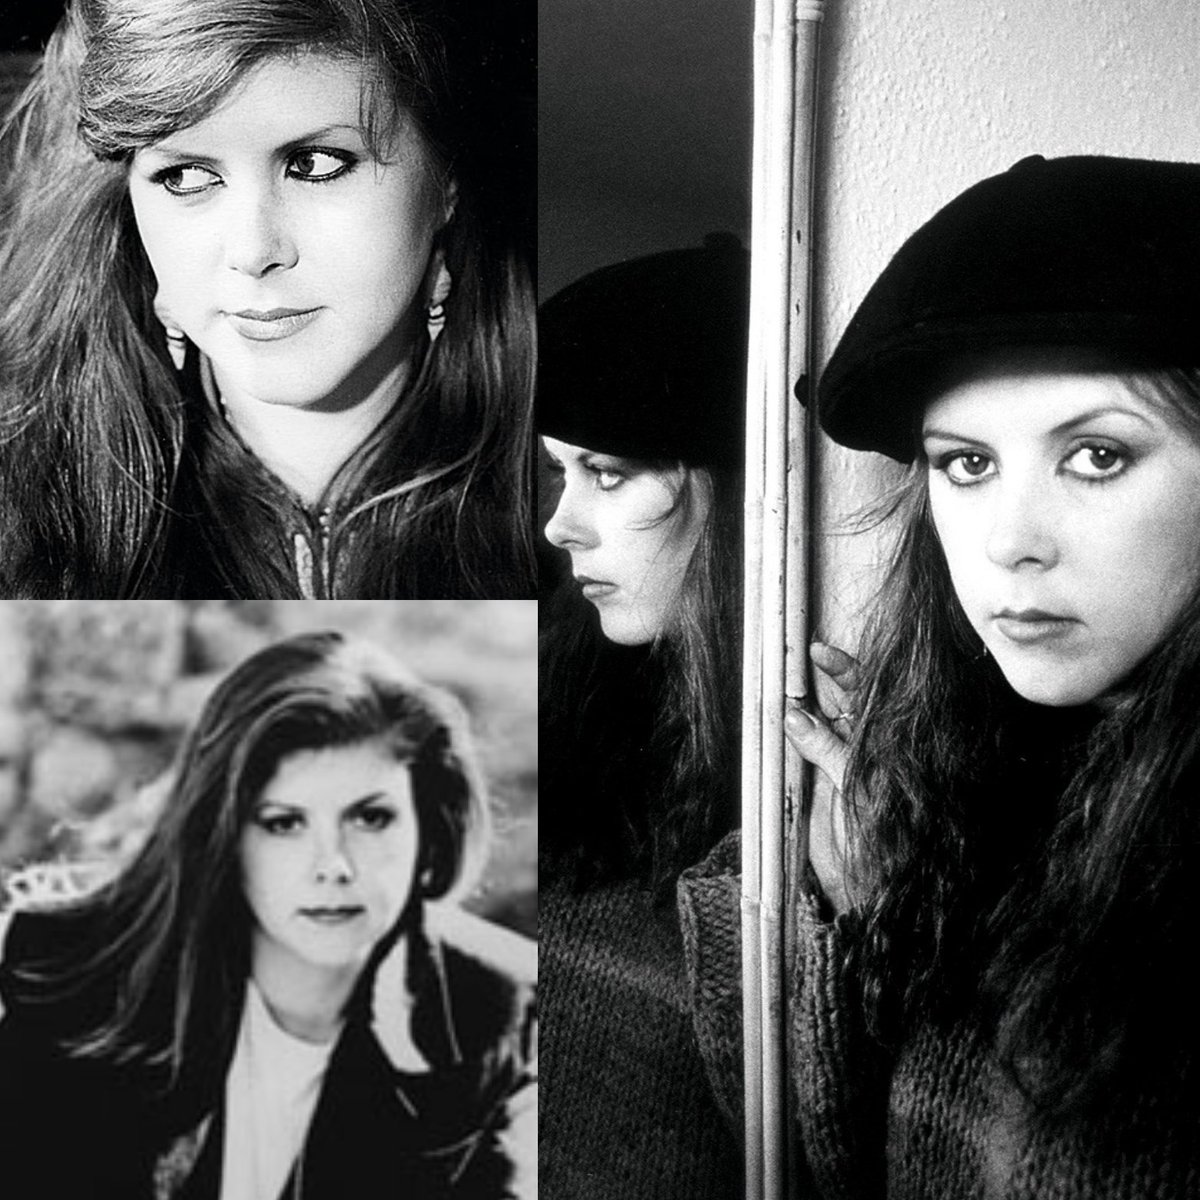 remembering the 
late, truly great
#KirstyMacColl 
who sadly passed away 
on this date in 2000.
Gone, but never forgotten x